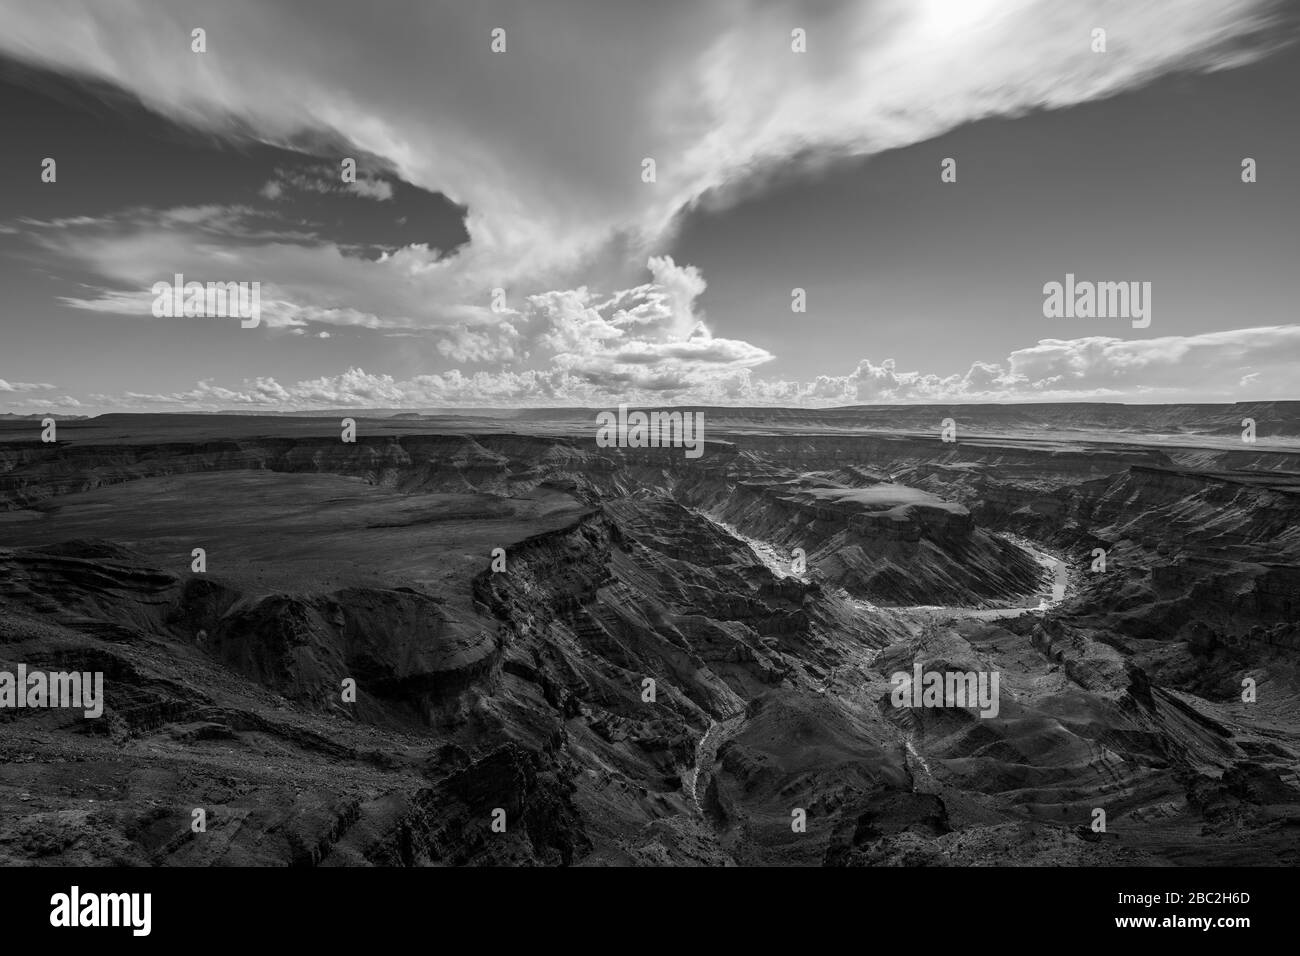 A black and white landscape taken at sunset on a stormy day on top of the arid and stark Fish River Canyon, Namibia, with the gorge and river in the f Stock Photo